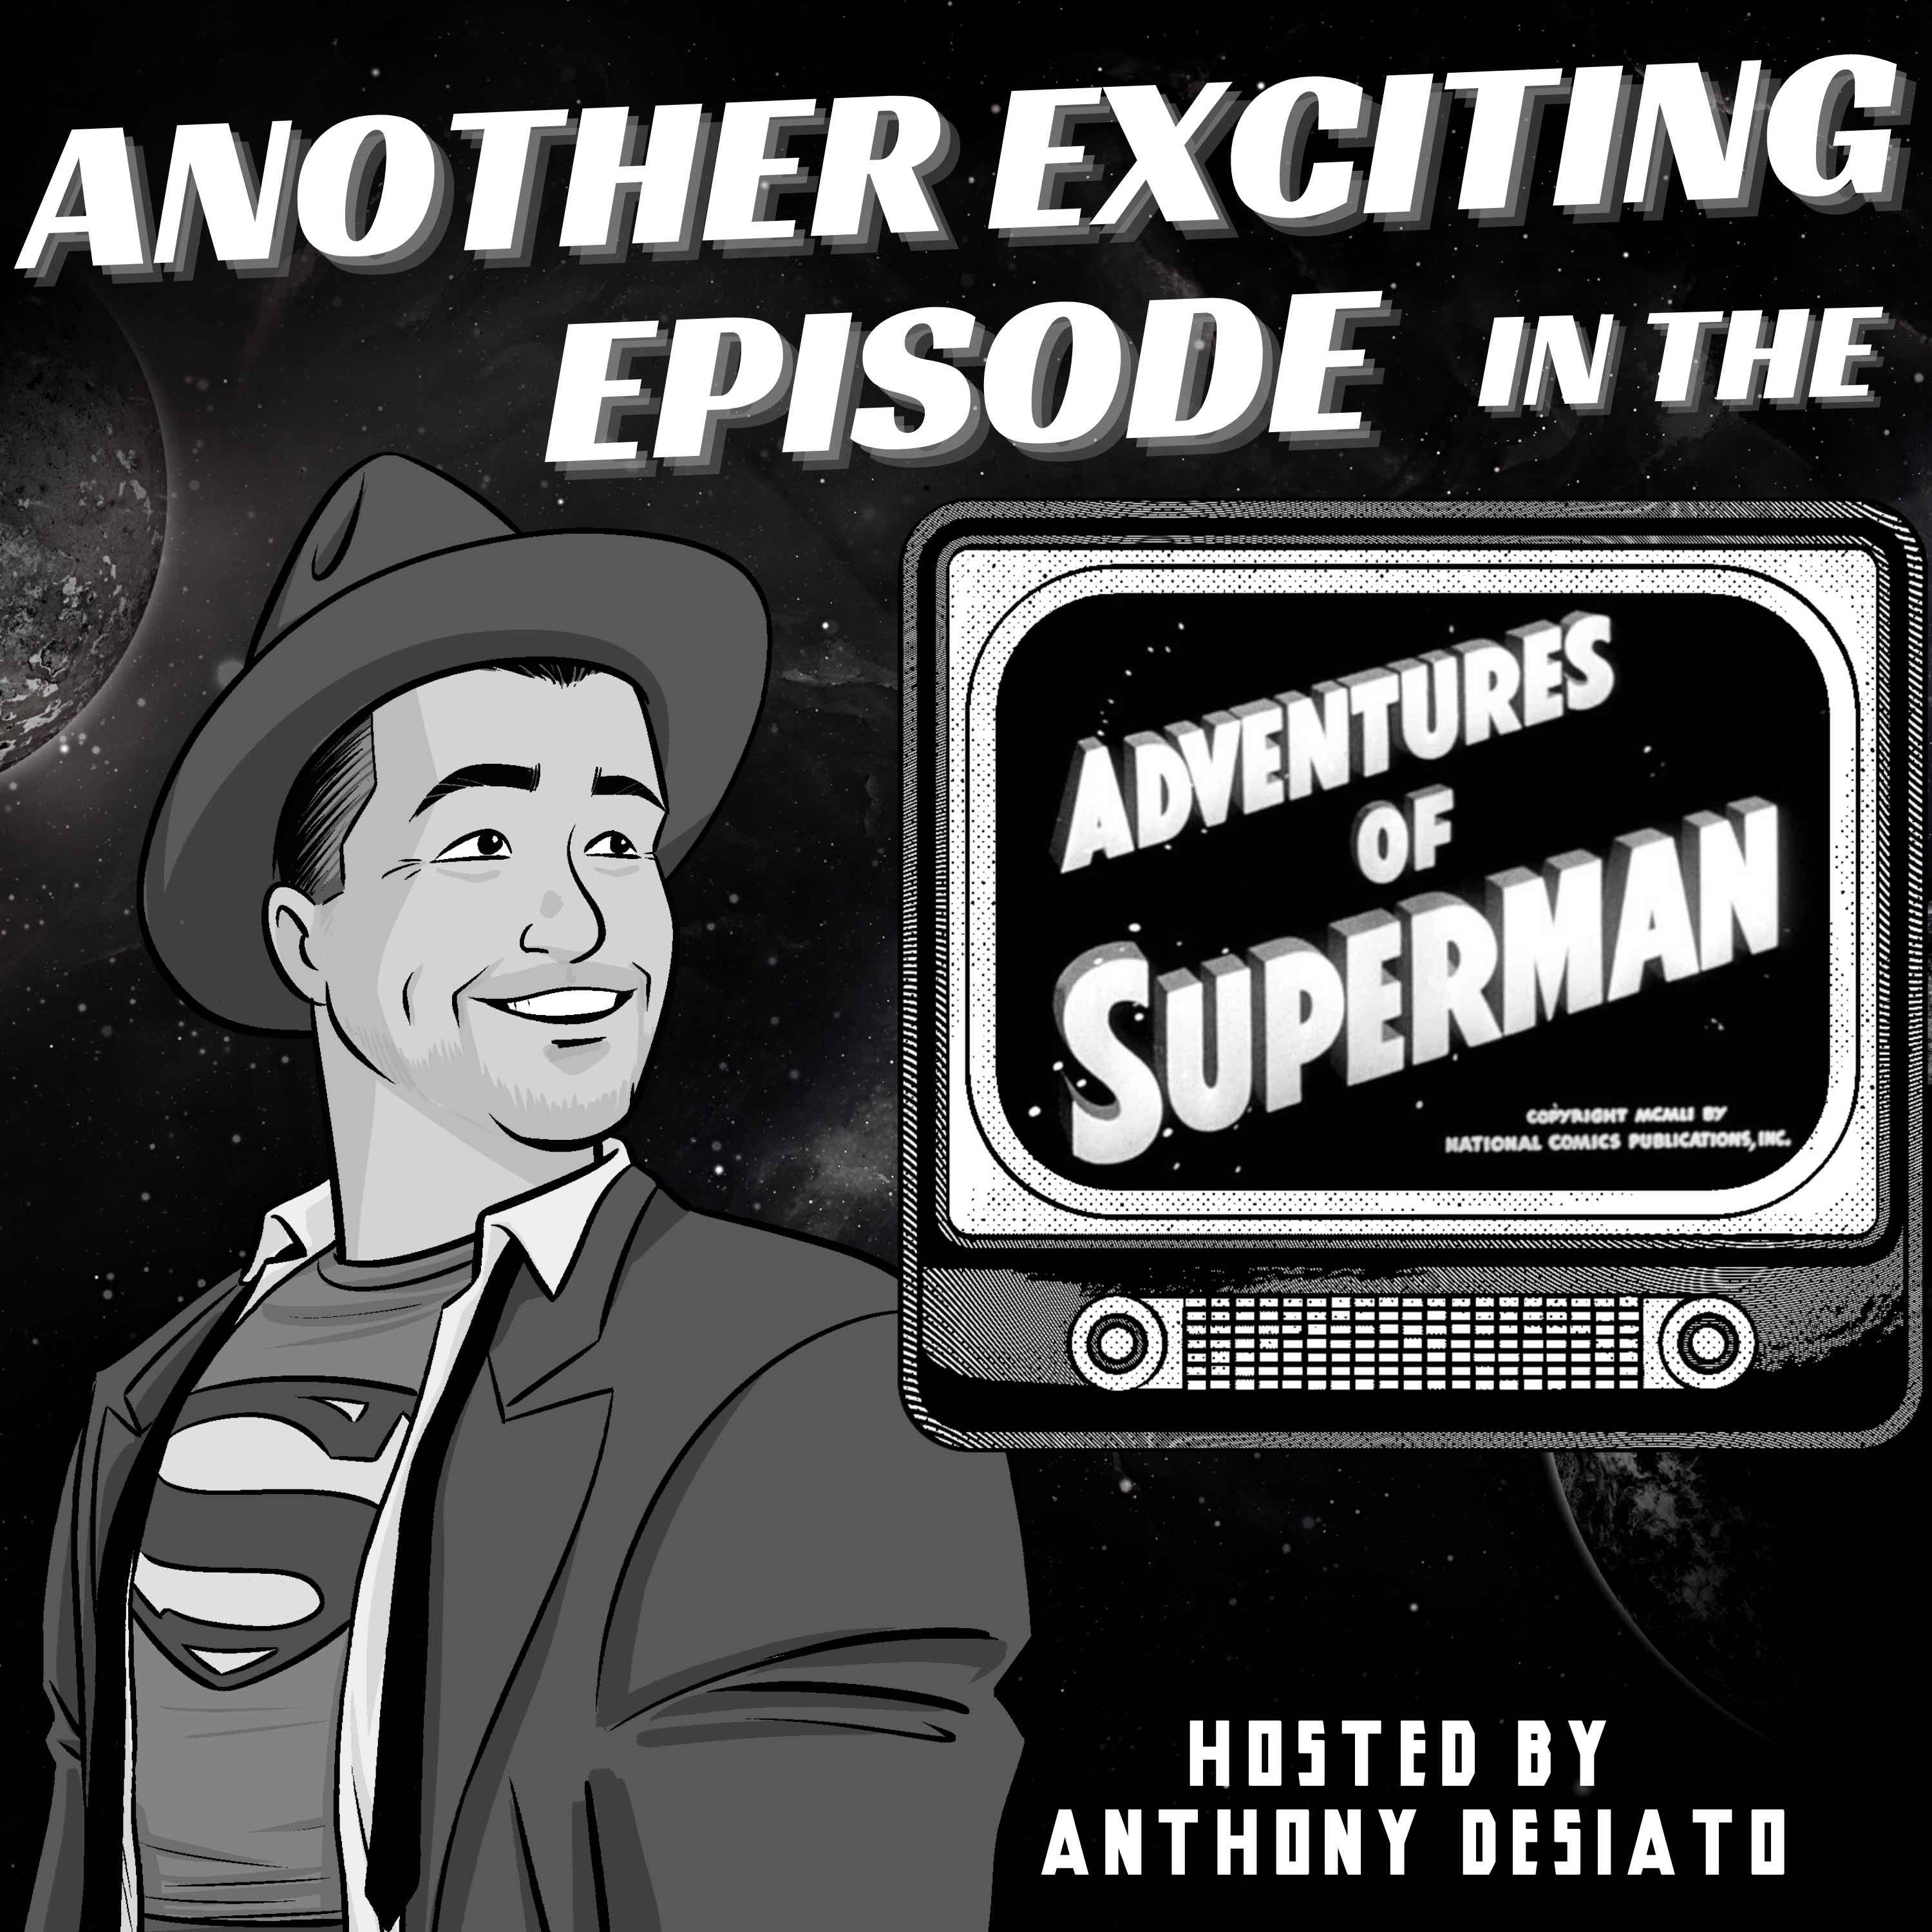 Artwork for Another Exciting Episode in the Adventures of Superman